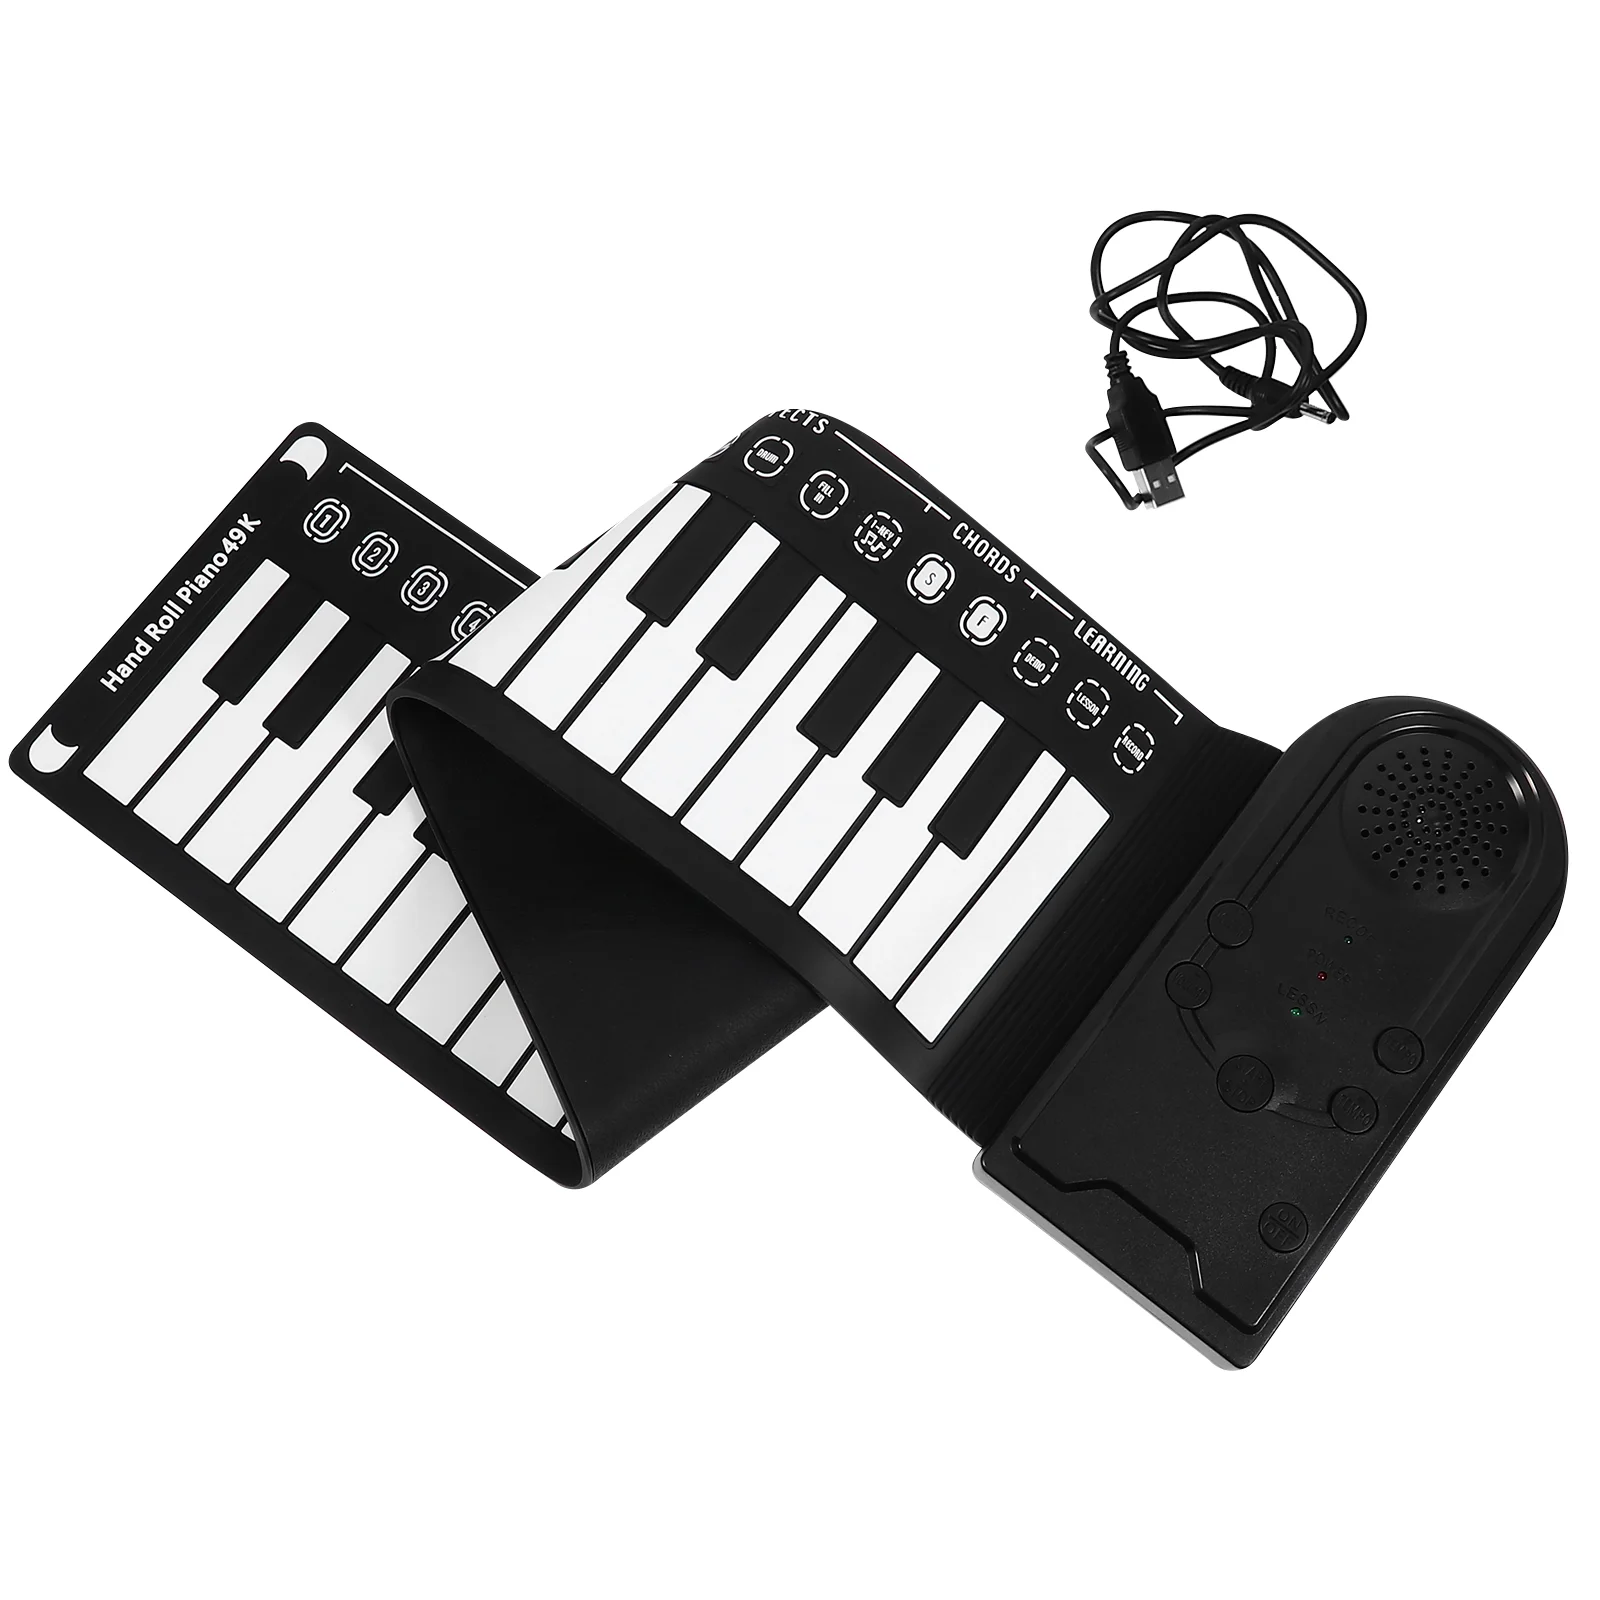 

49 Keys Roll Piano Kid Hand Rolled Silicone Keyboard Electronic Digital Foldable Silica Gel Instrument Child